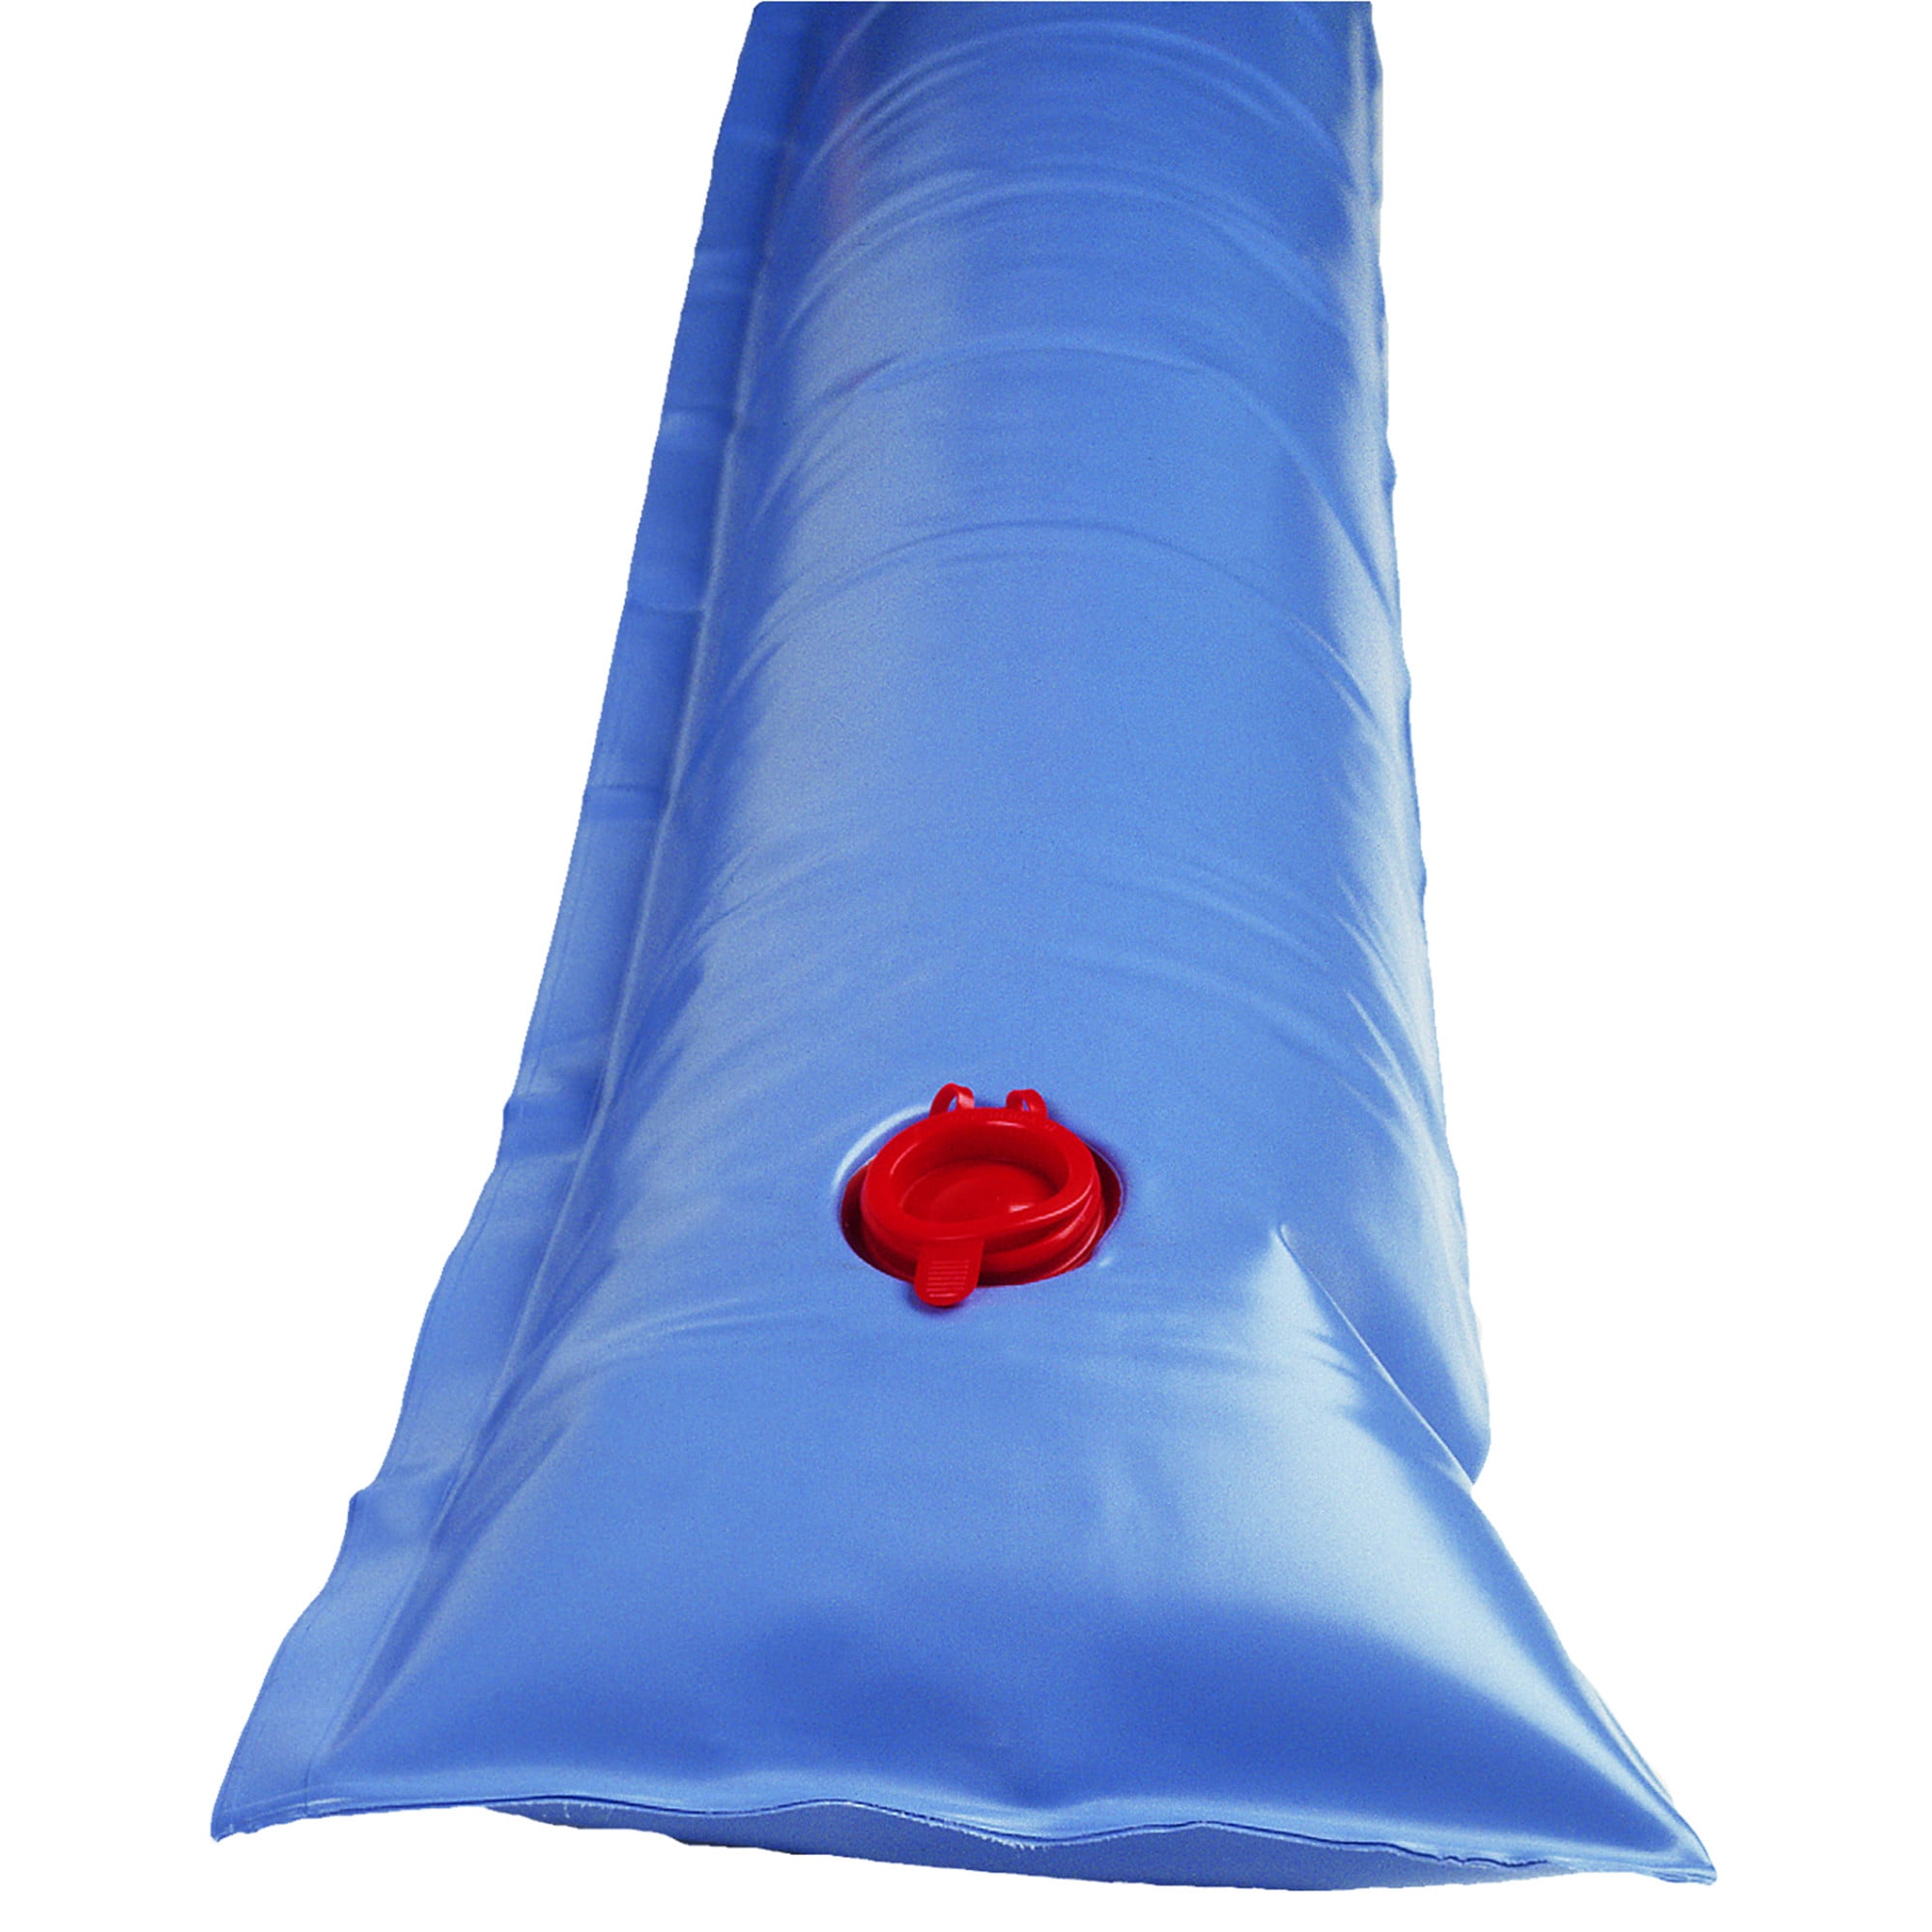 8' GLI's Double Water Tubes For Inground Swimming Pool Winter Cover 12 Pak-BLUE